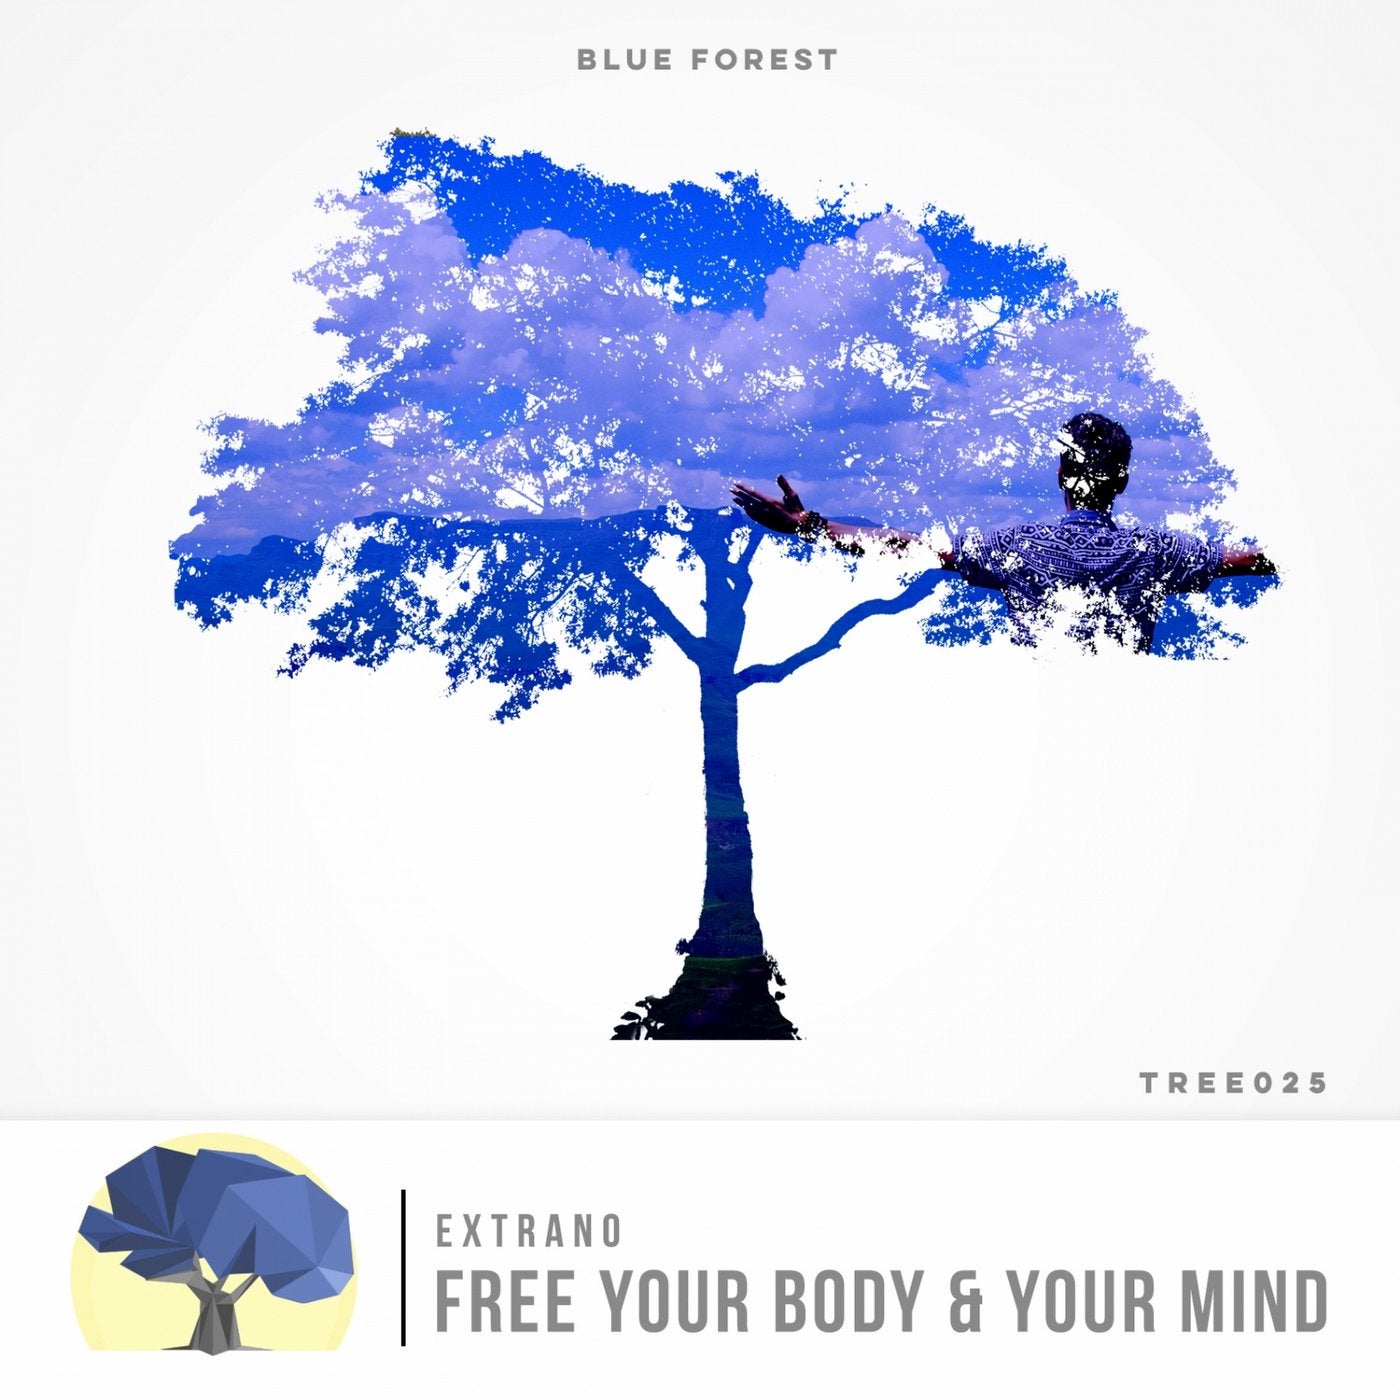 Free Your Body & Your Mind